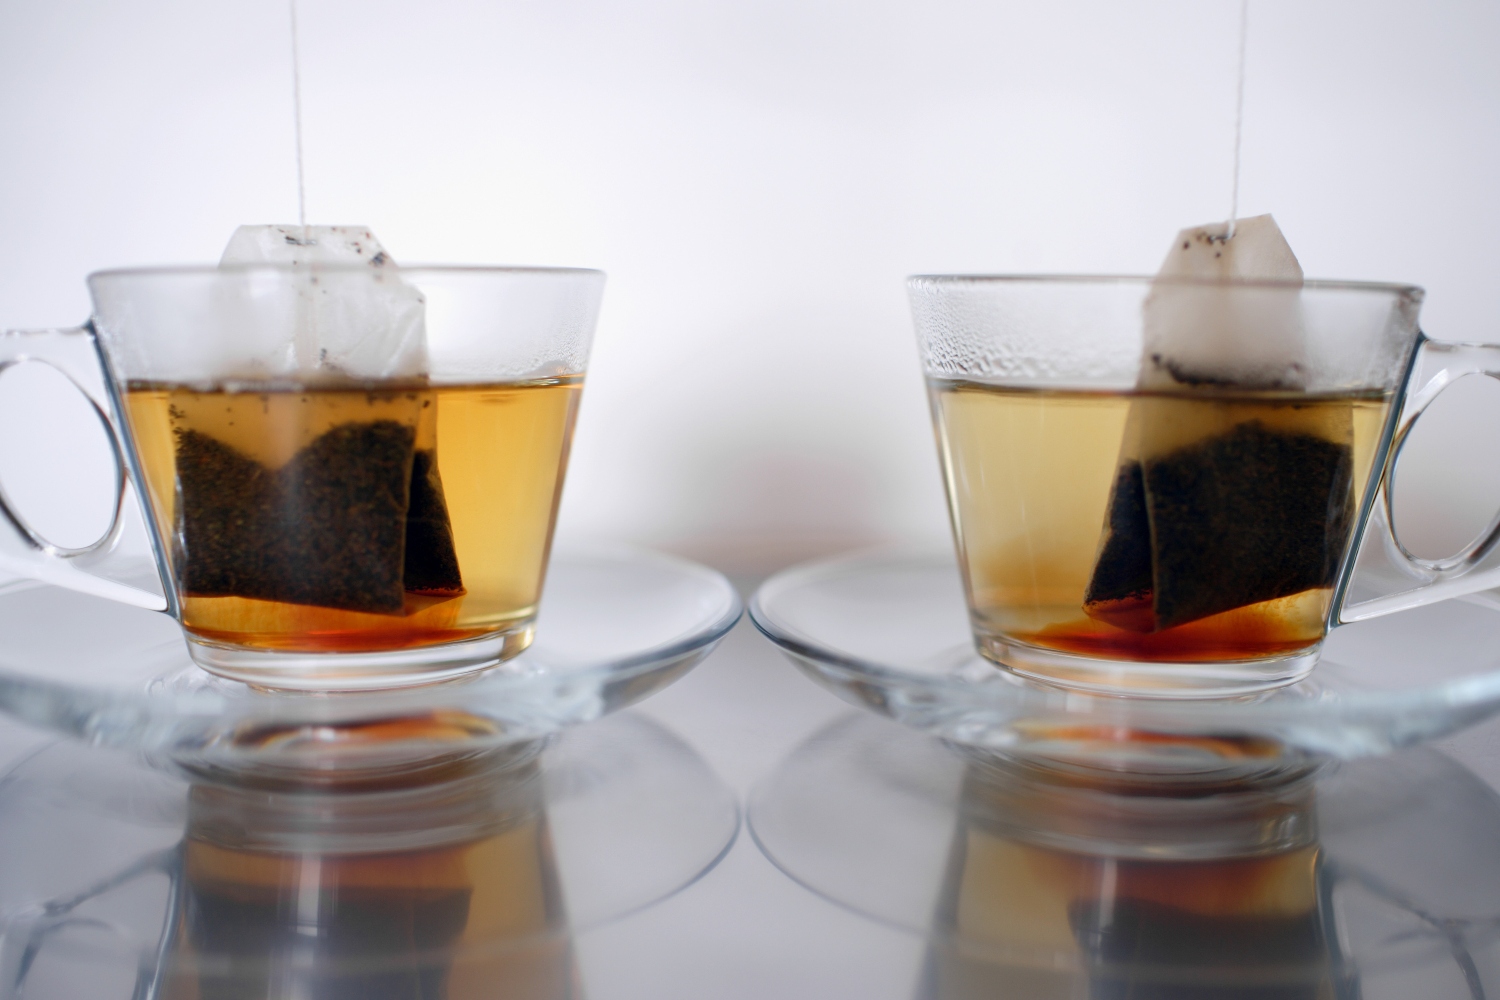 Image shows two tea bags steeping in clear mugs